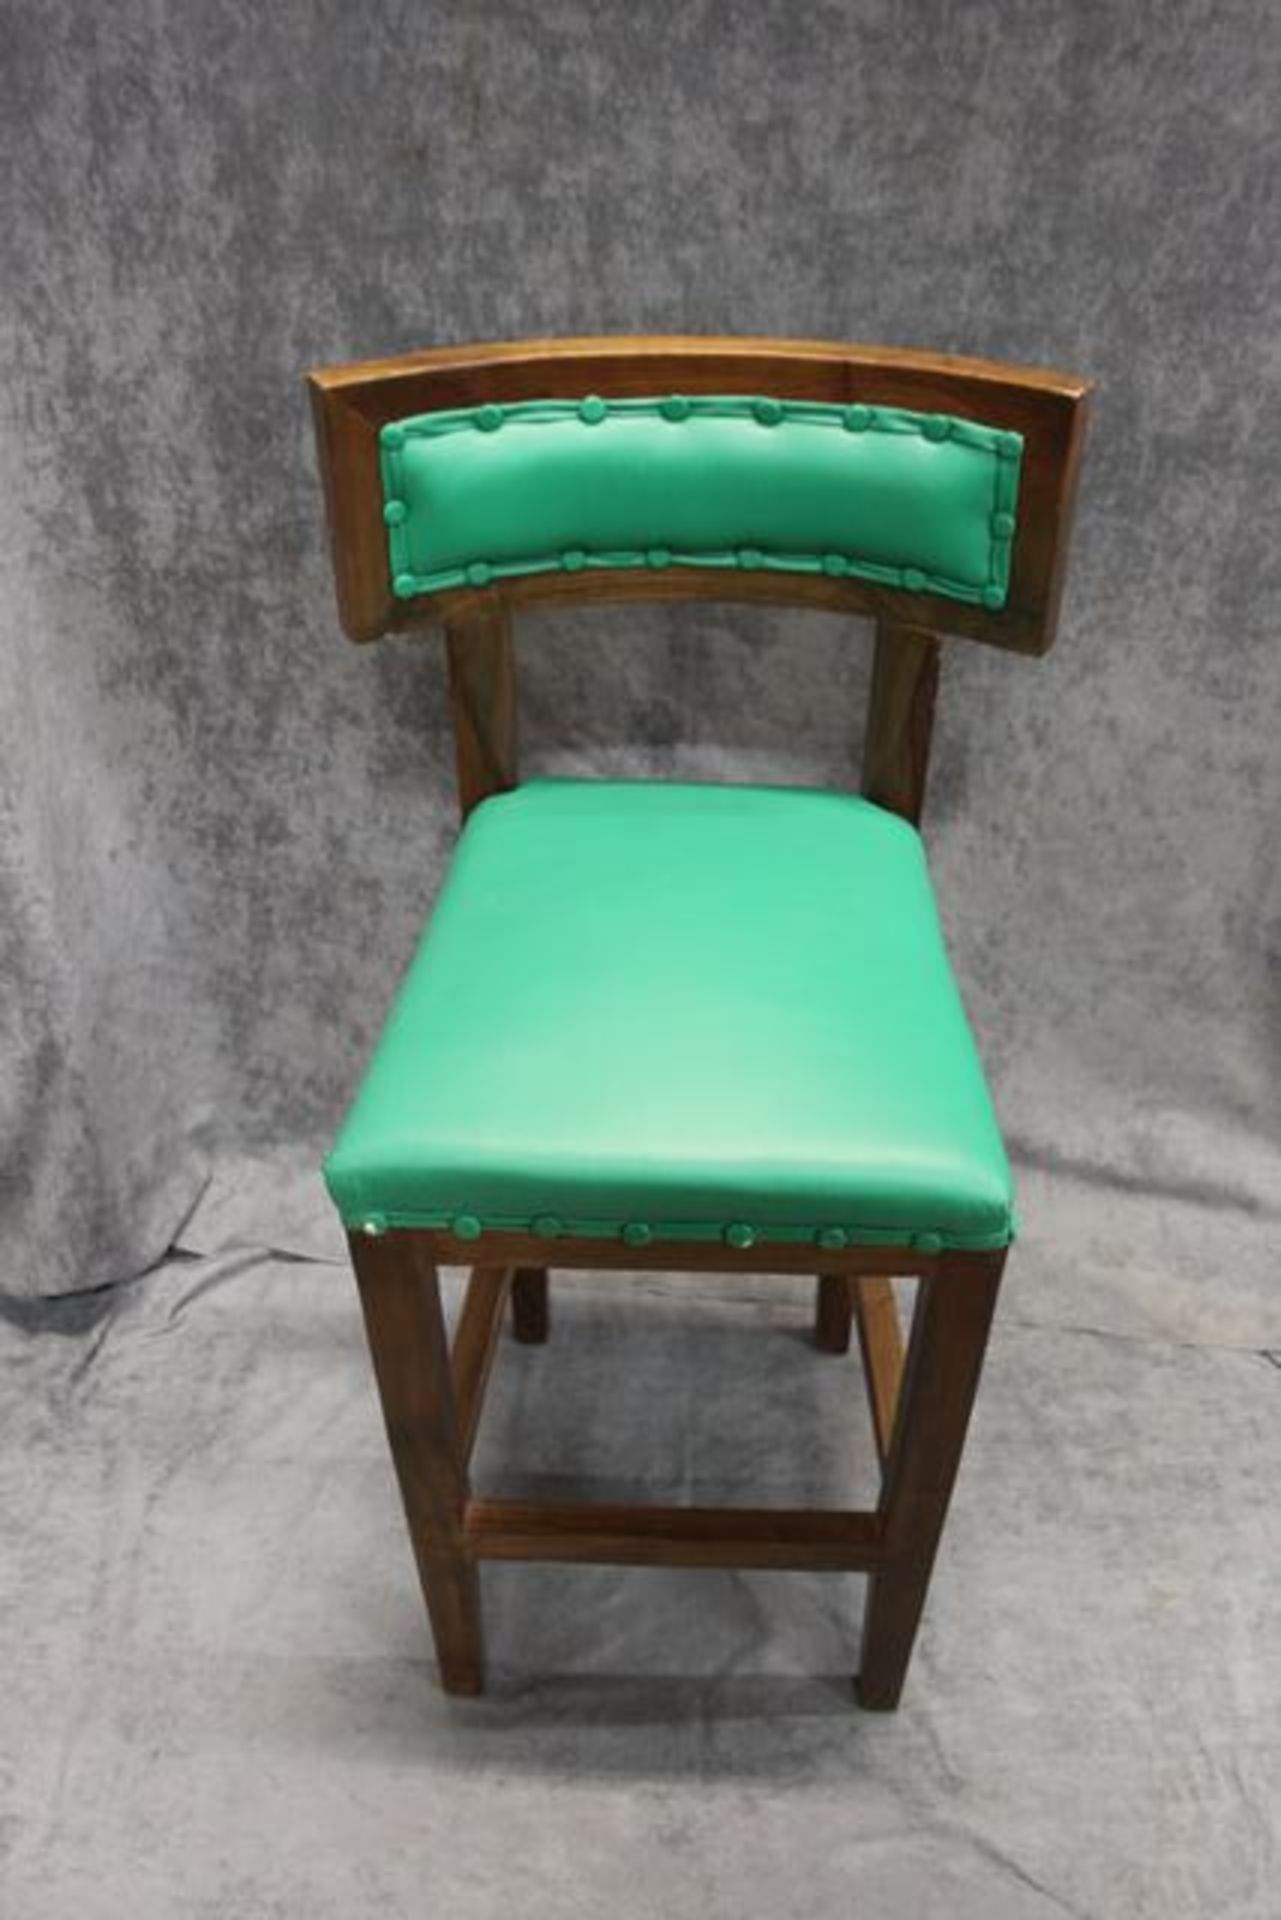 A pair of contemporary green bonded leather bar stool polished walnut finish frame with a studded